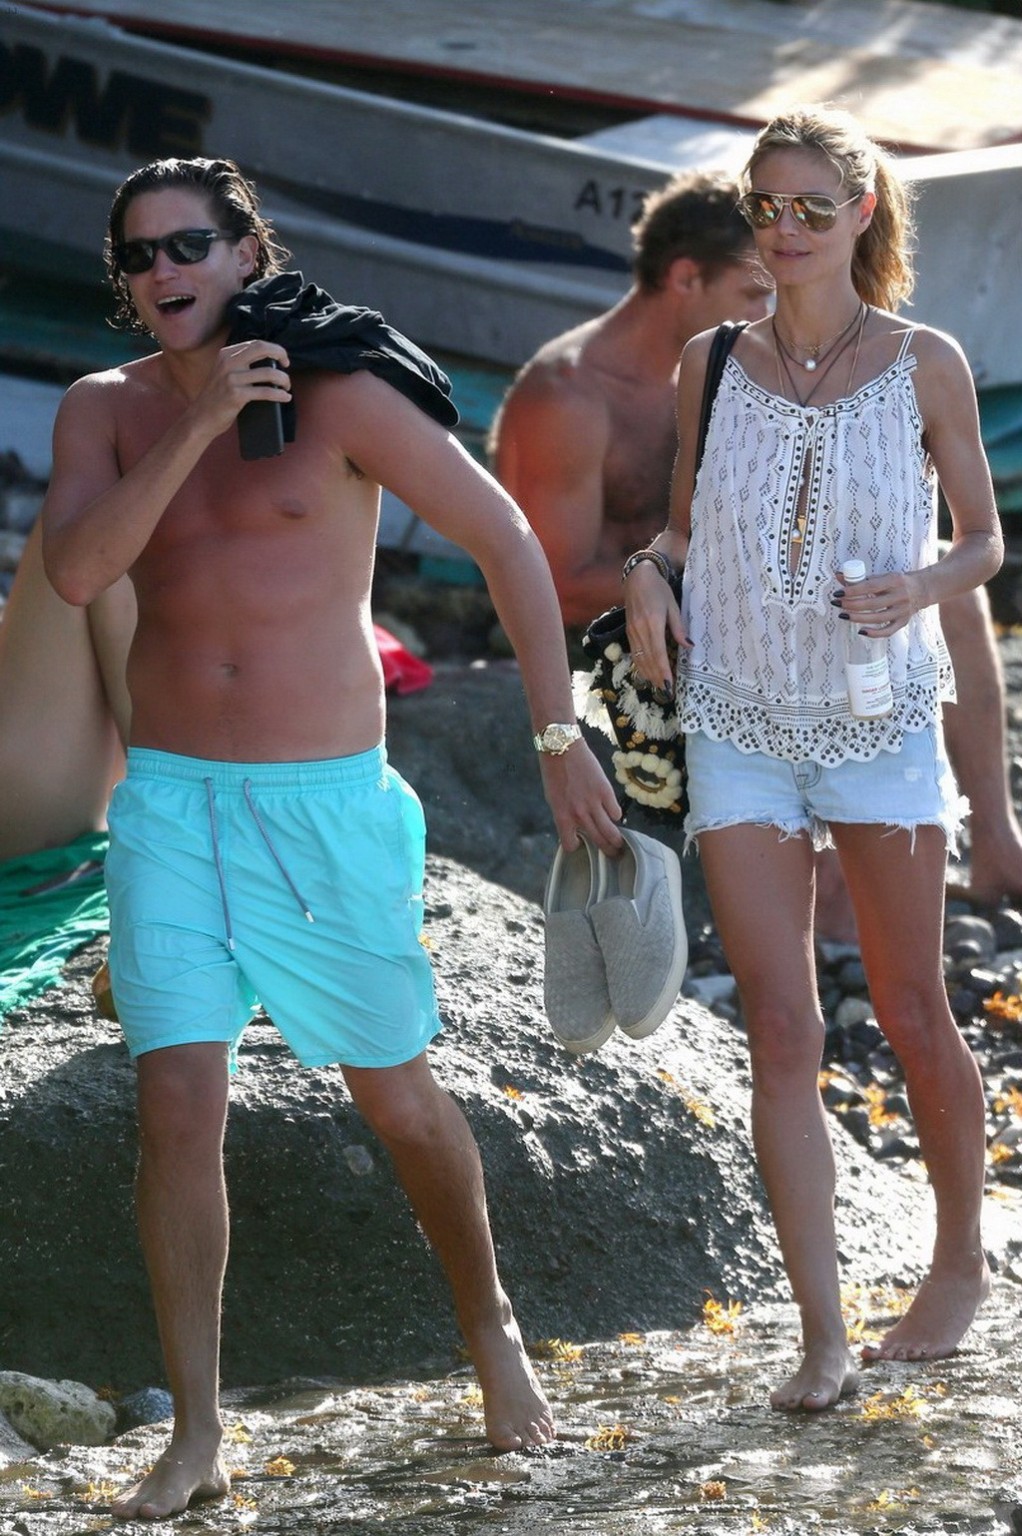 Heidi Klum caught topless in a white thong during a vacation in StBarts #75177371